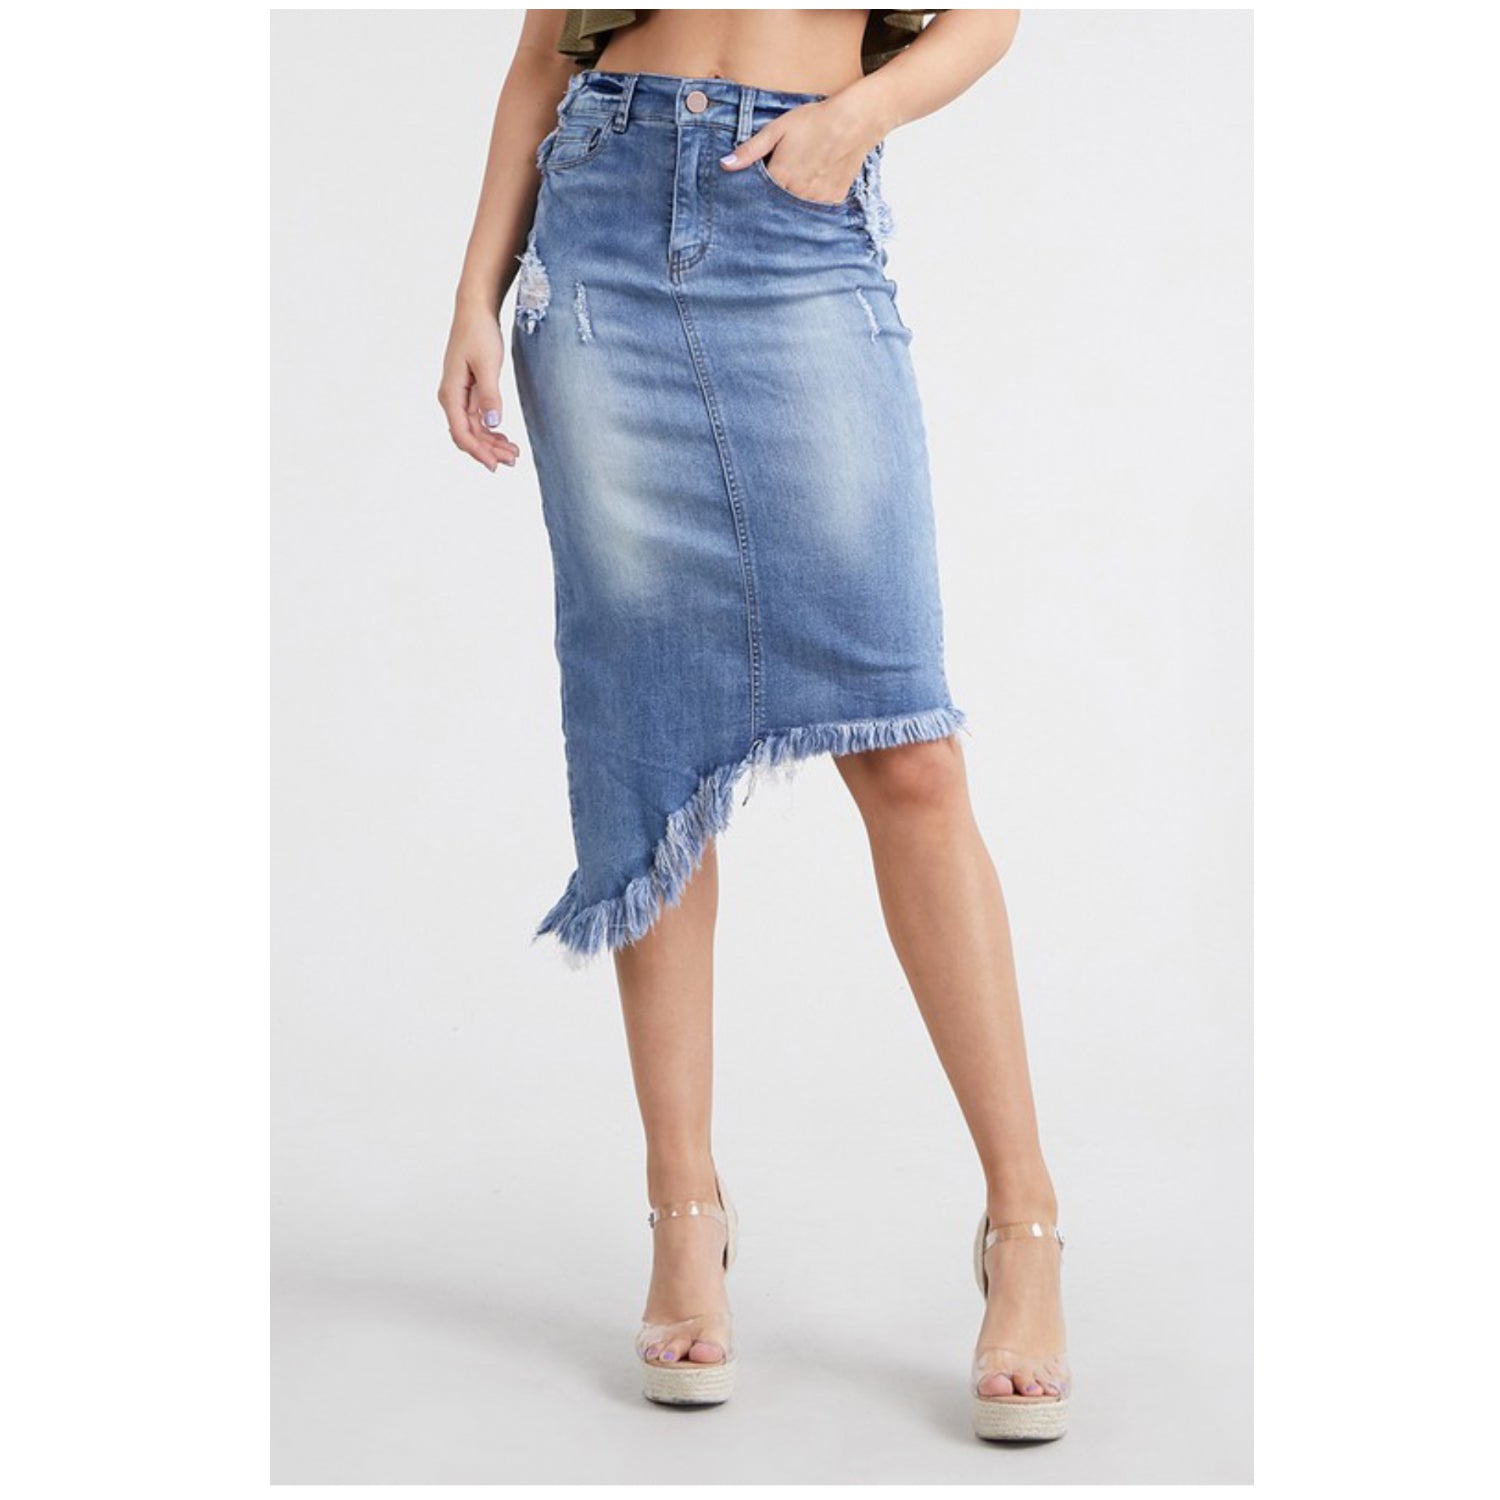 Knee-length Denim Skirt #knee #length #denim #skirt #outfit 5-pocket, knee-length  skirt… | Knee length dresses casual, Denim skirts knee length, Denim skirt  outfits